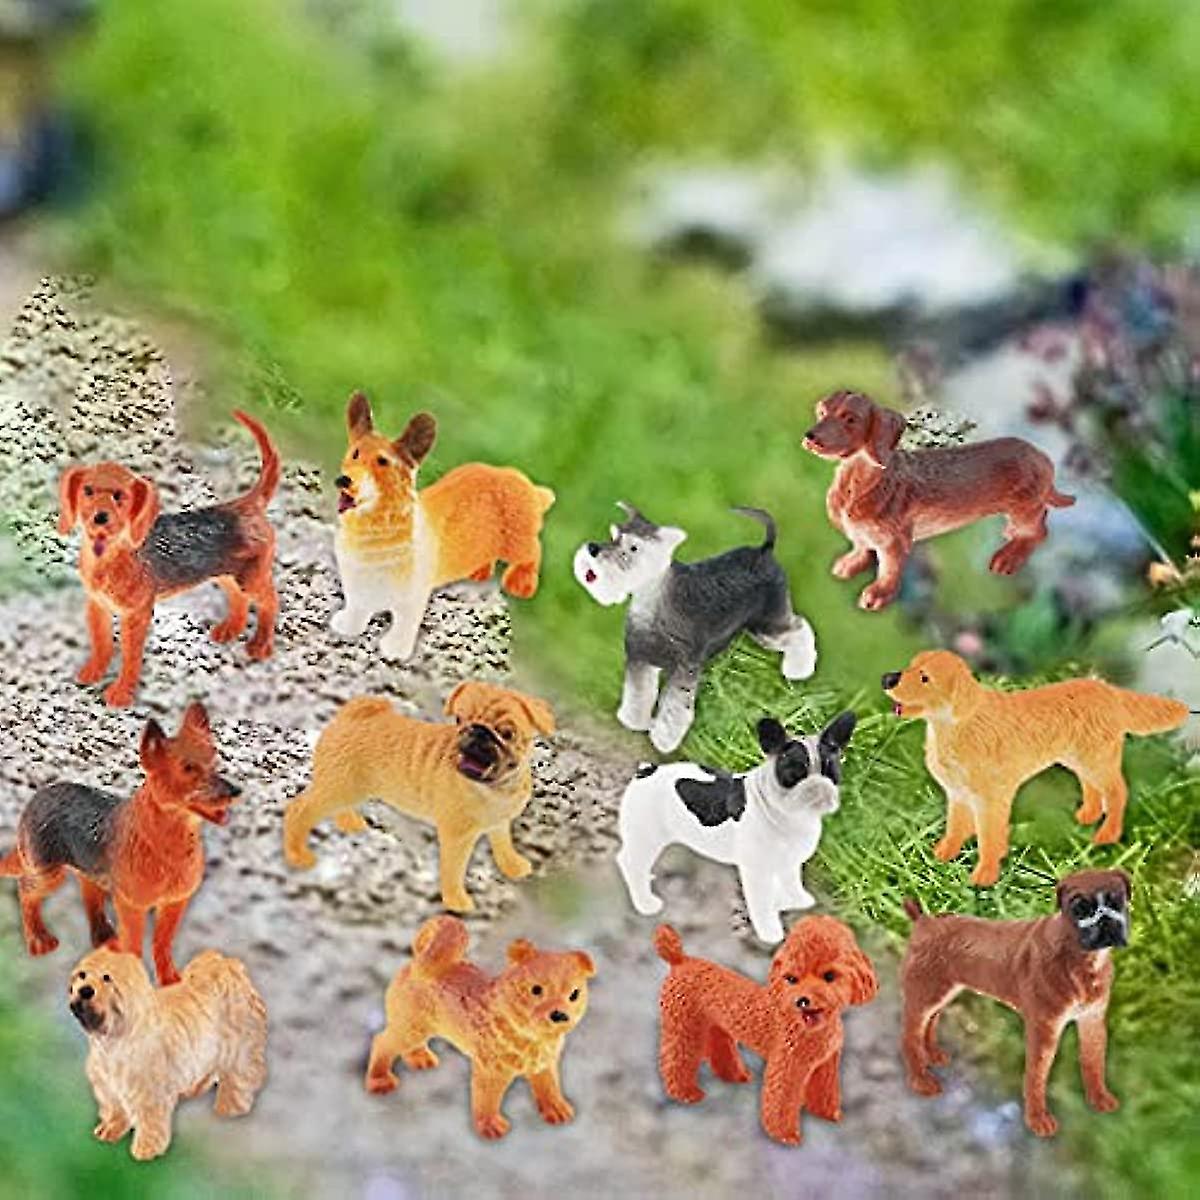 12x Realistic Dog Figurines Toy Set Kids Play Toys Dog Miniature Playset Dog Animal Figurines For Cake Topper Table Decor